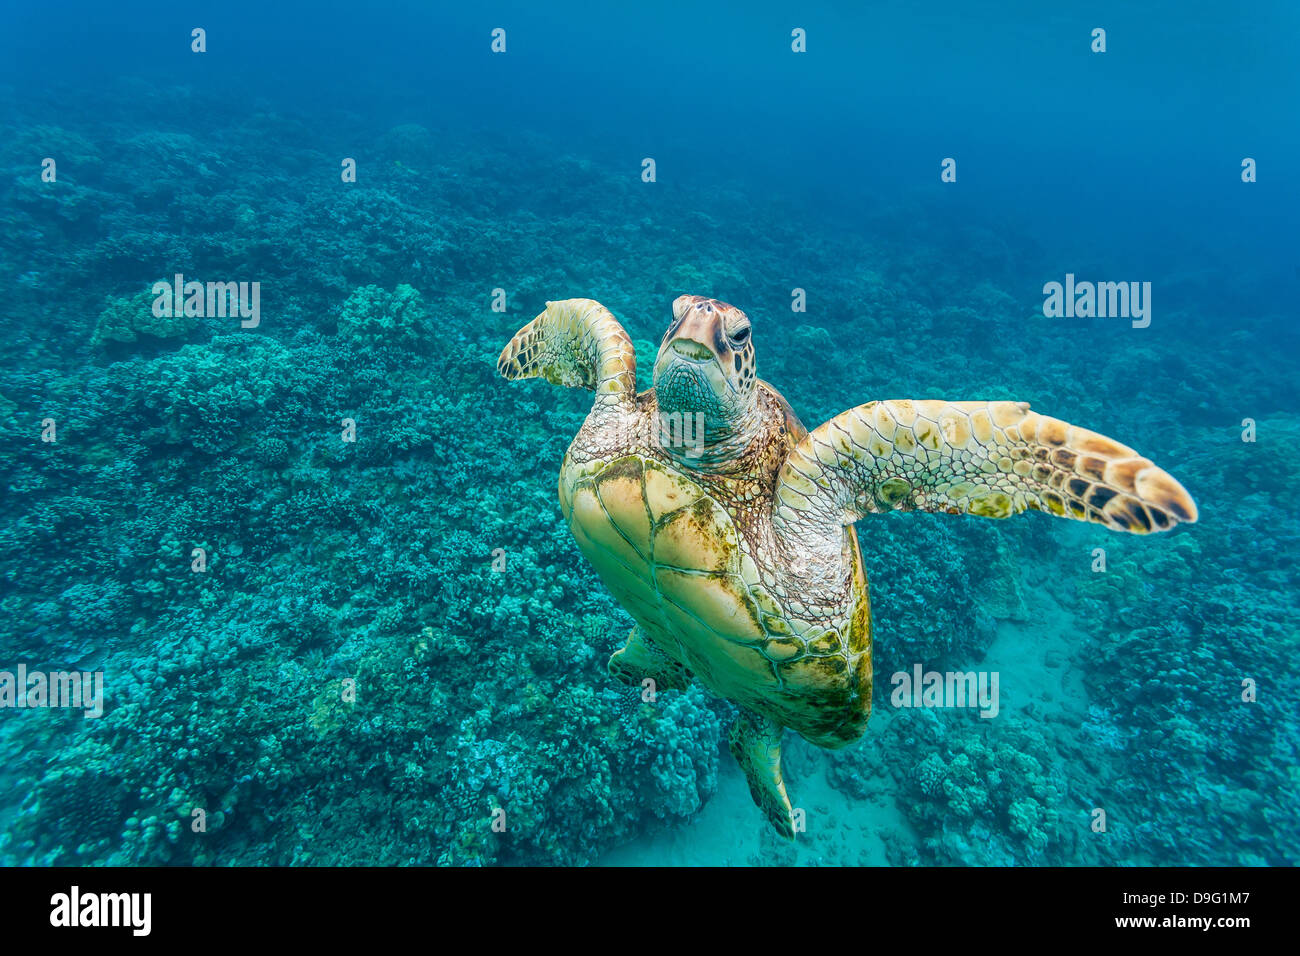 Tortue verte (Chelonia mydas) sous l'eau, Maui, Hawaii, United States of America Banque D'Images